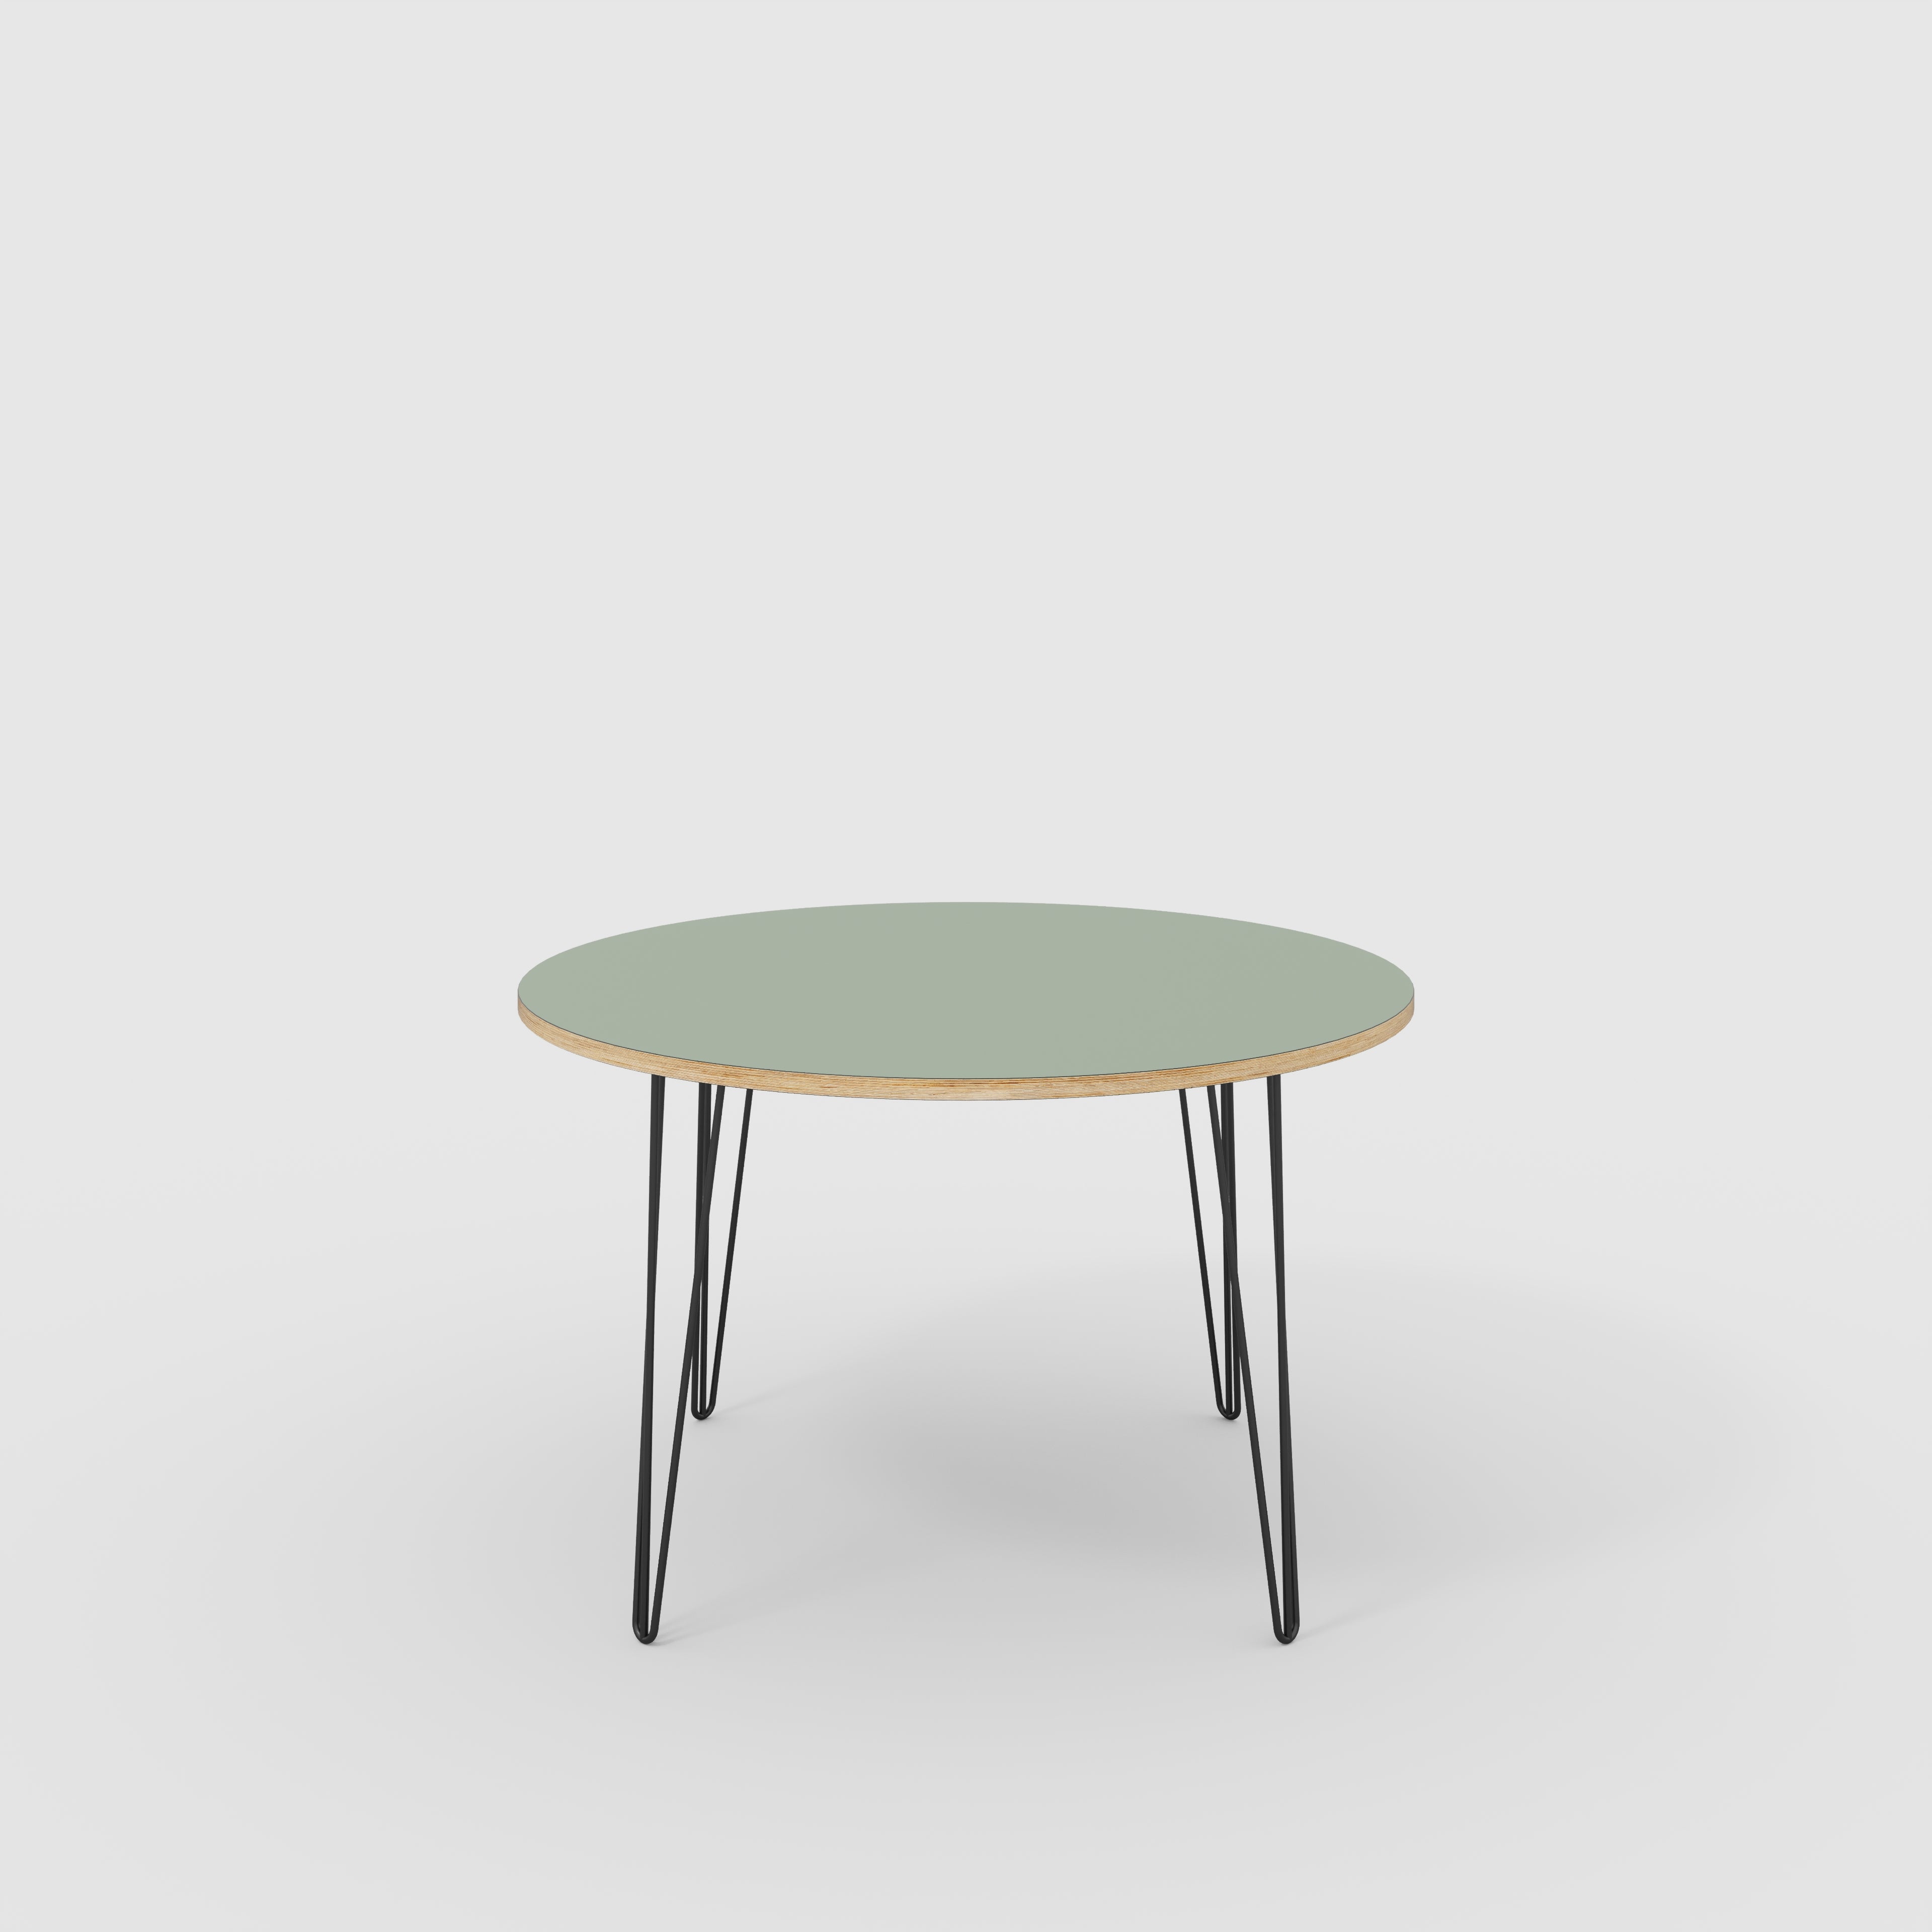 Round Table with Black Hairpin Legs - Formica Green Slate - 1200(dia) x 735(h)